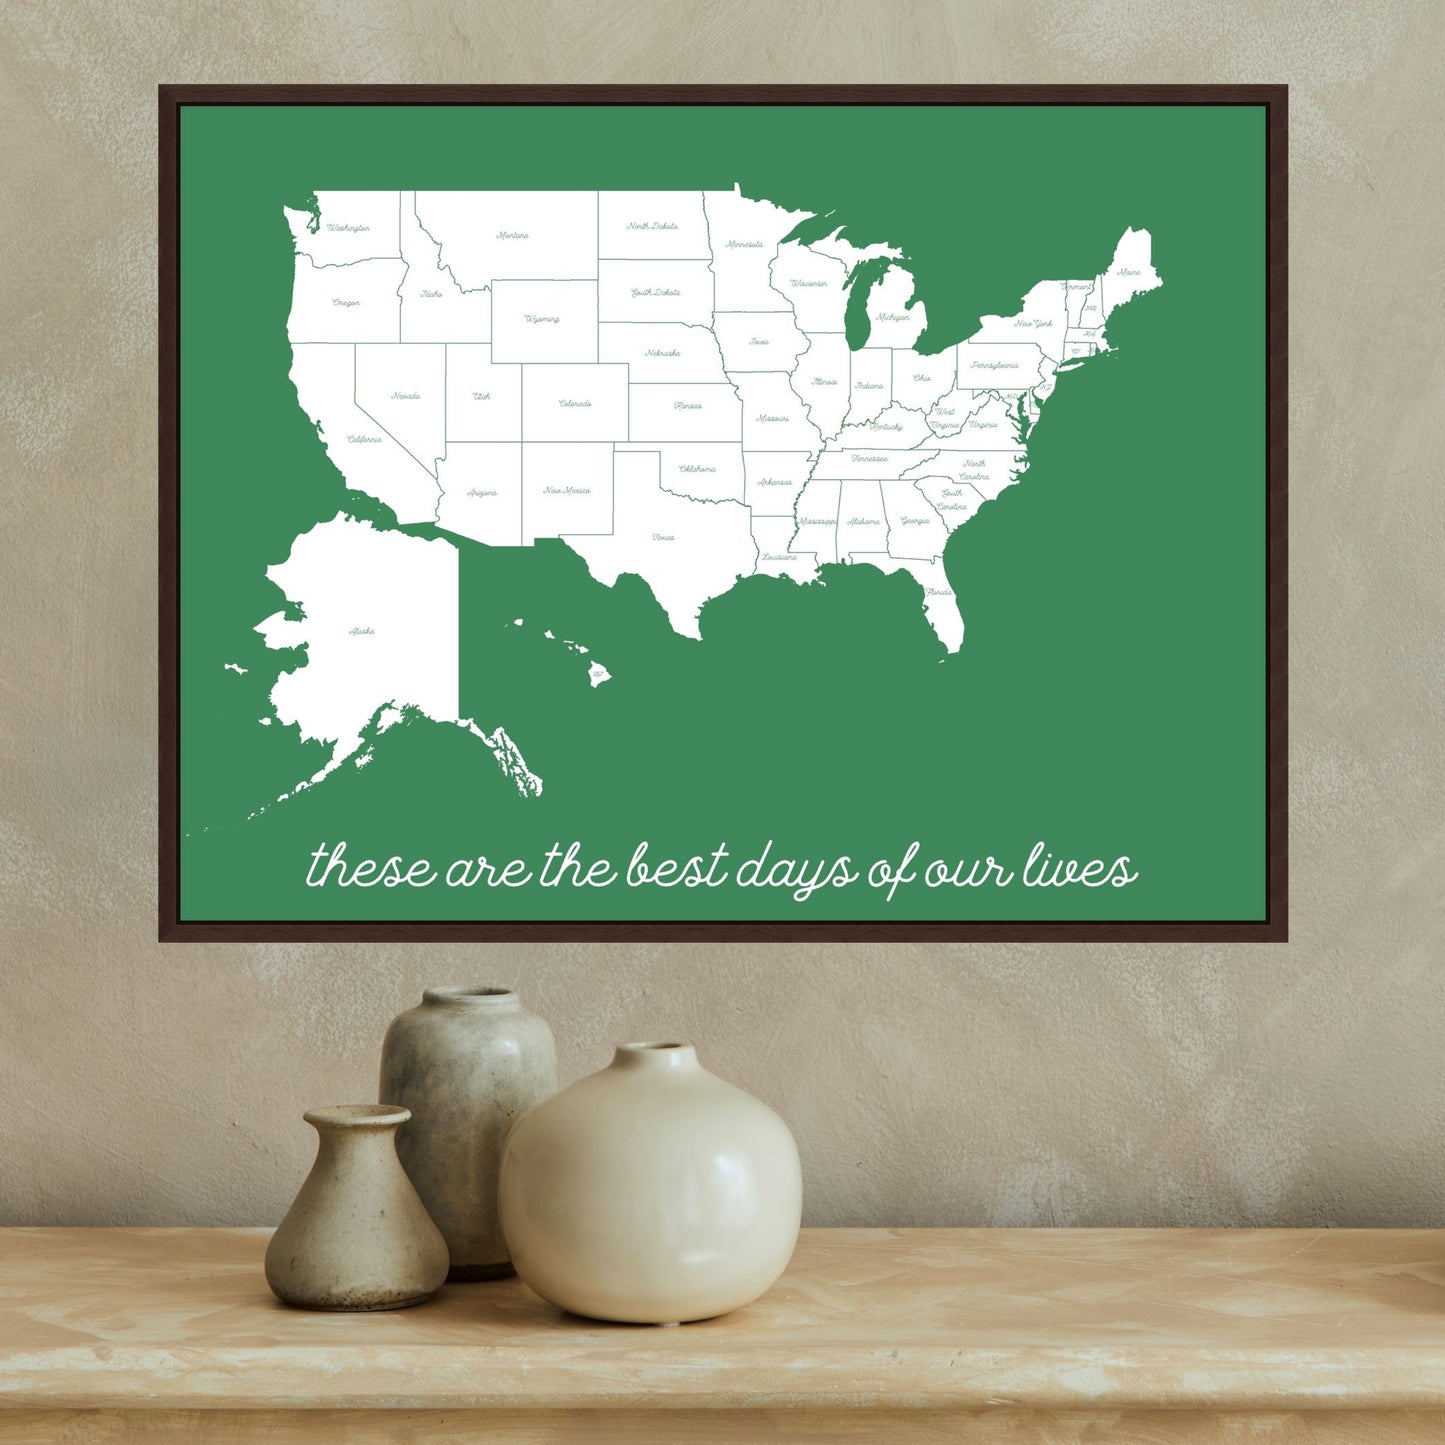 These Are The Best Days of Our Lives United States Map • Custom United States Map • United States Travel Map • Pushpin Map • Personalized Map Gift • Perfect Gift for Him • Perfect Gift for Her • Personalized Gift